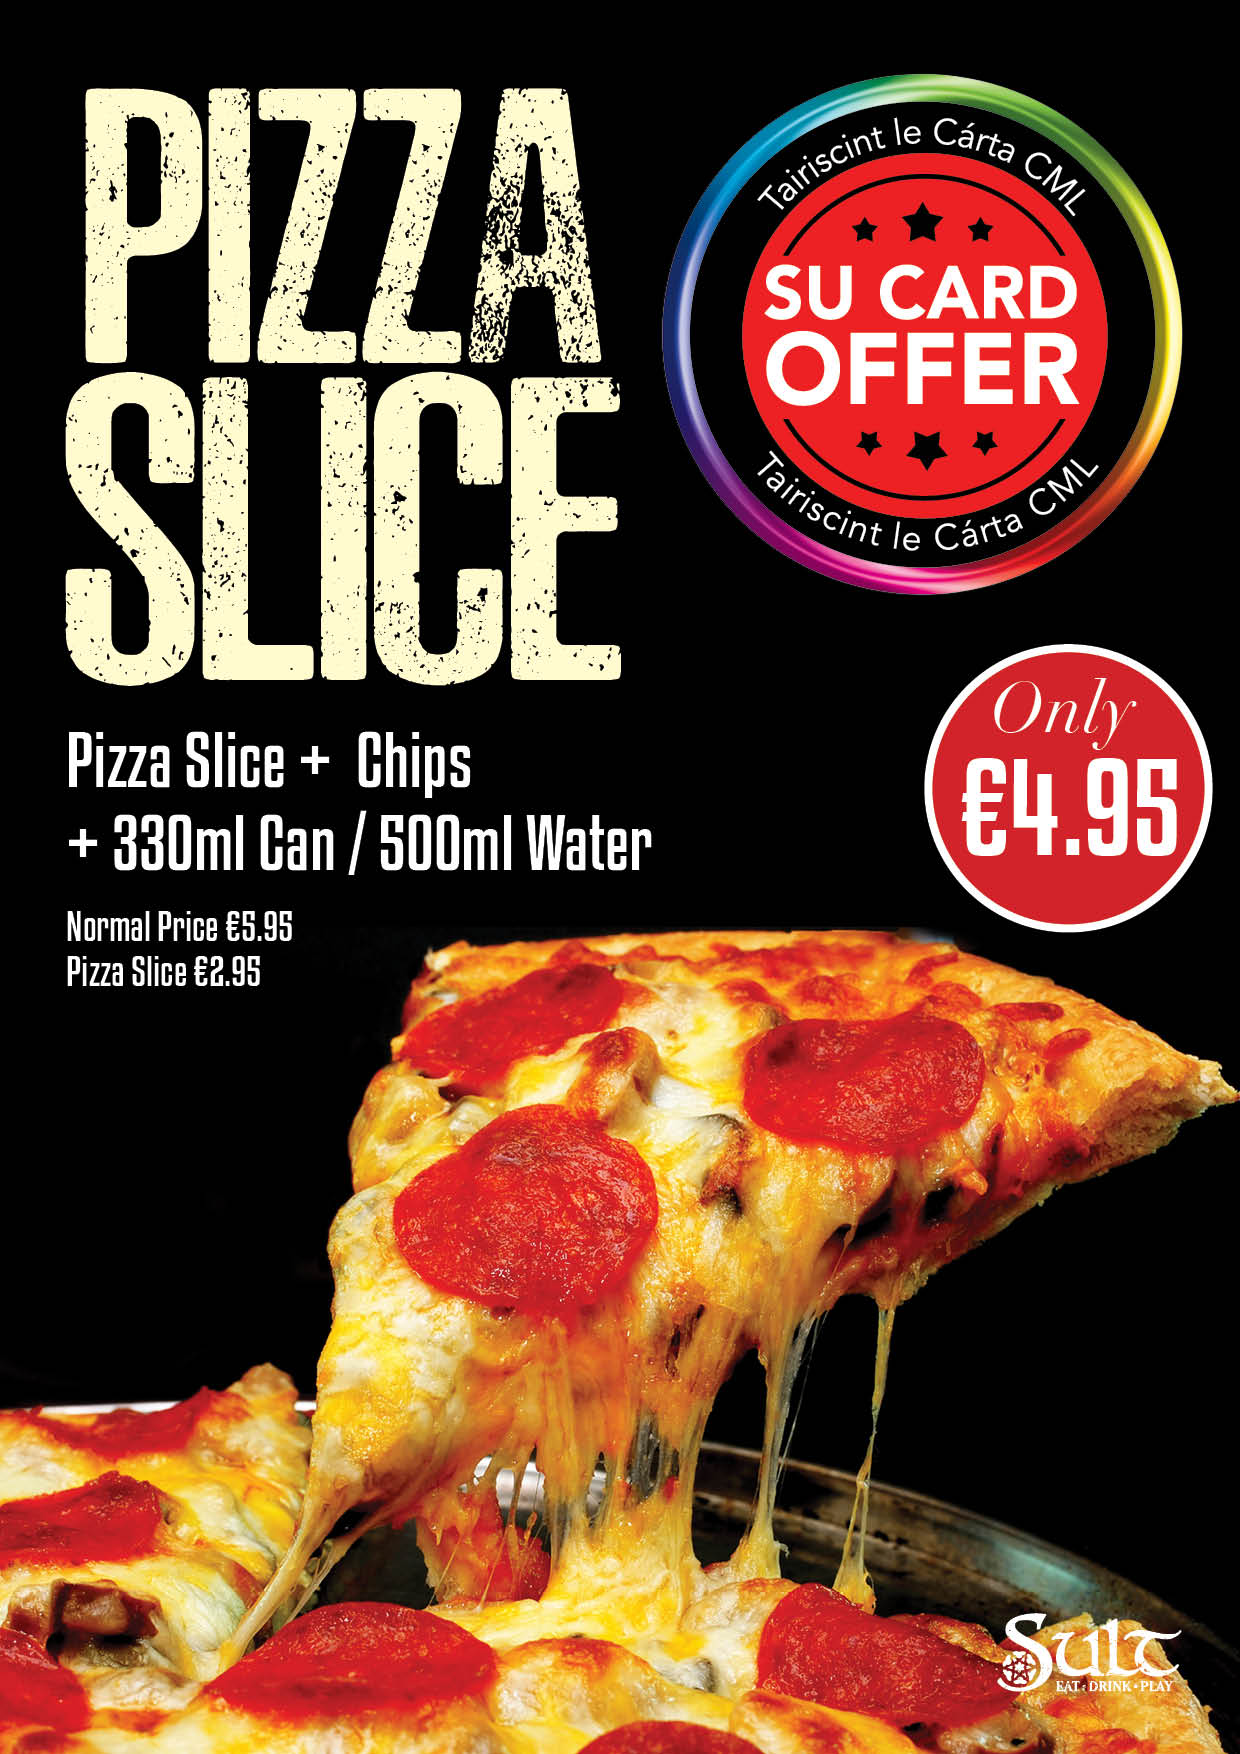 Sult Nuig Check Out Our New Pizza Slice Deal Get This For 4 95 With Your Su Card Pizzaslice Sucardoffer Affordable Loveinyourtummy T Co Iussatthym